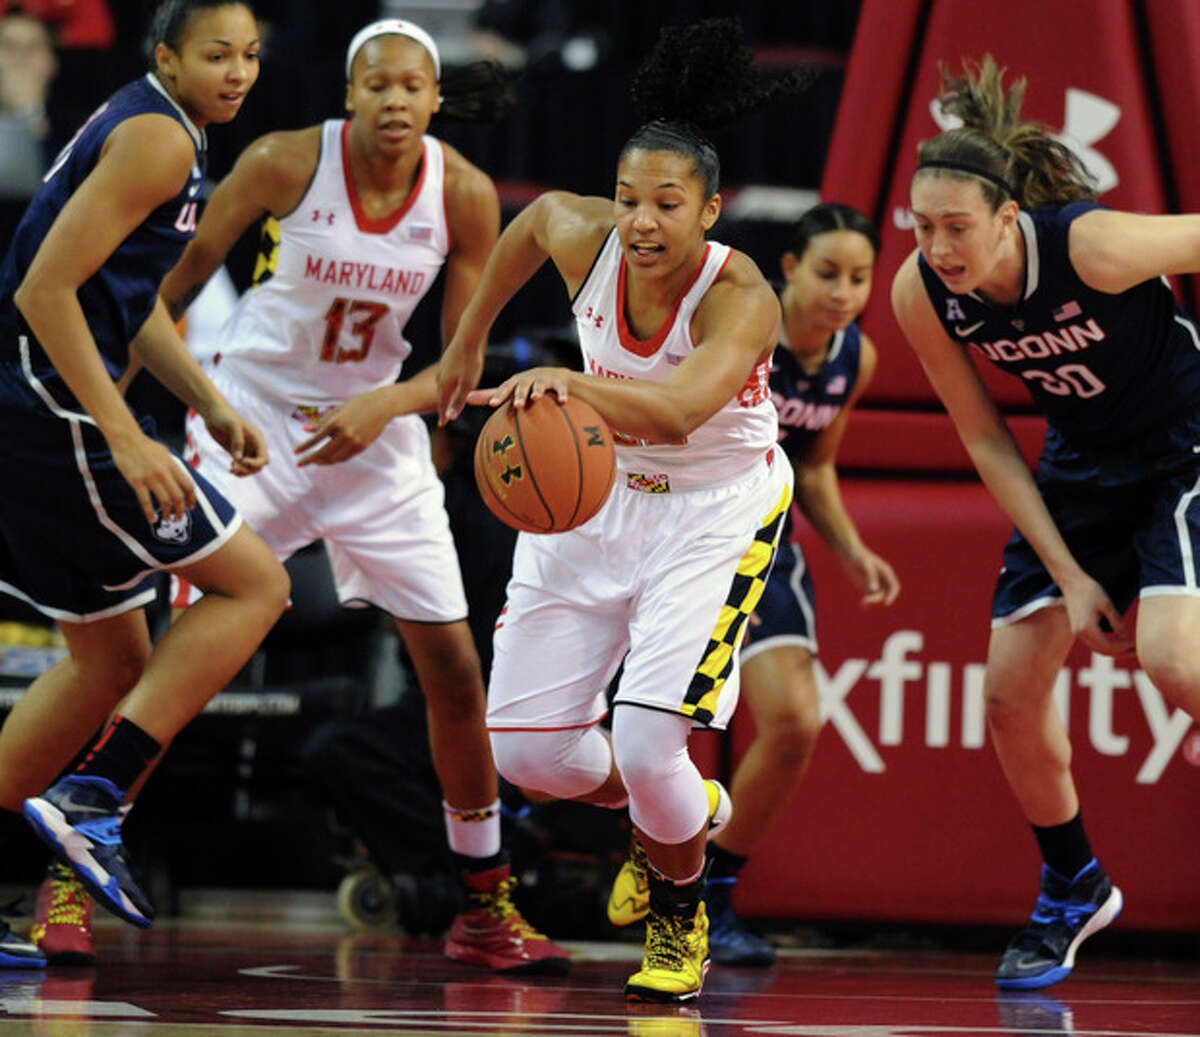 Maryland's Alyssa Thomas, center, grabs a rebound ahead of Connecticut's Breanna Stewart, right, in the first half of an NCAA basketball game Friday, Nov. 15, 2013 in College Park, Md.(AP Photo/Gail Burton)